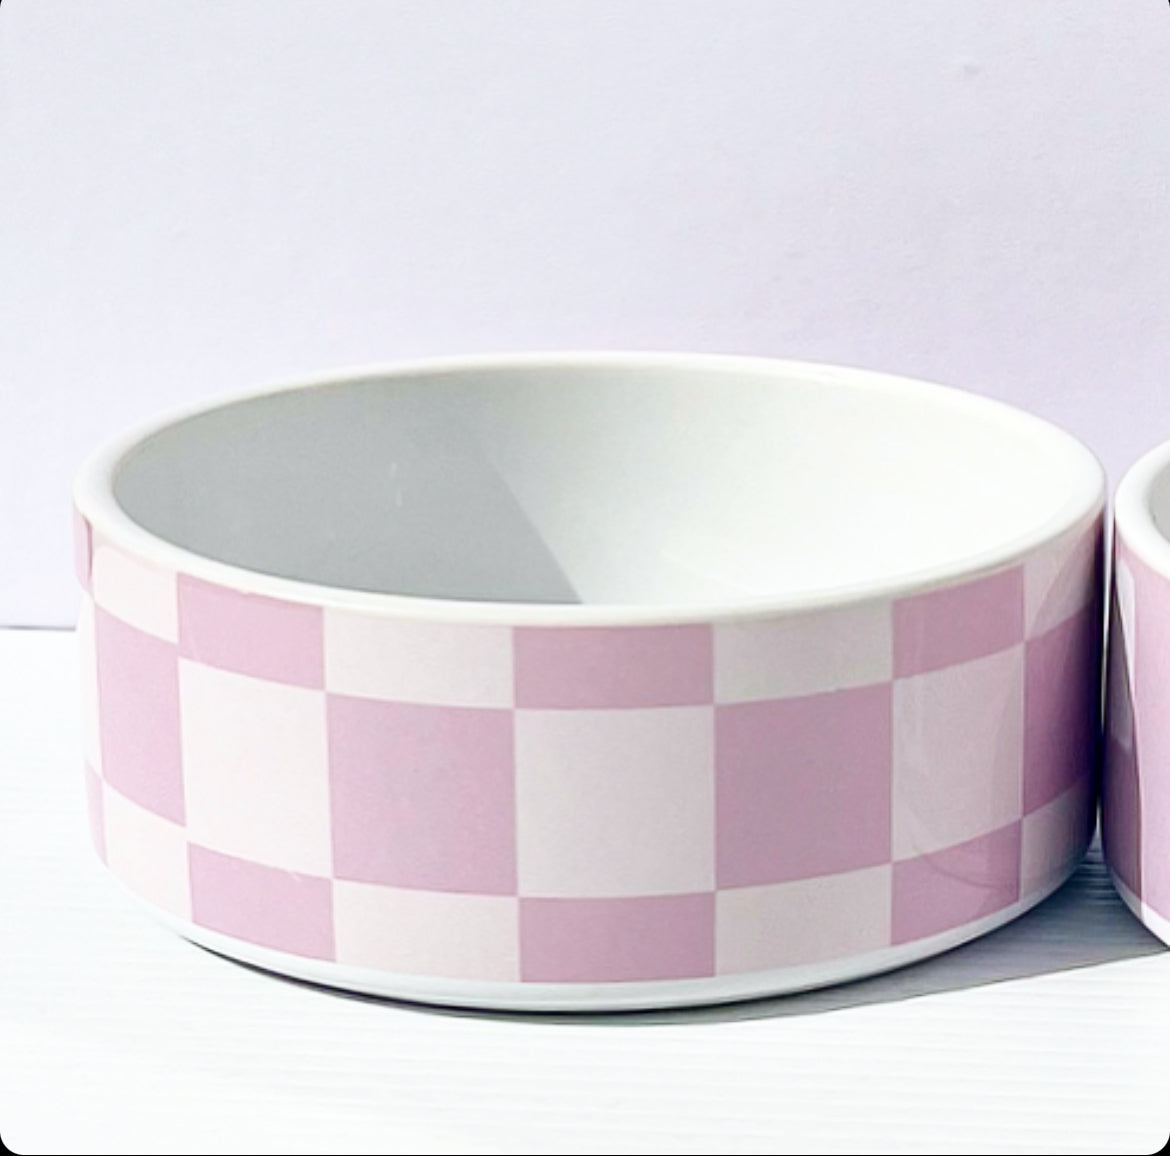 Medium/Large checked Ceramic Pet Bowl - Add your pets name